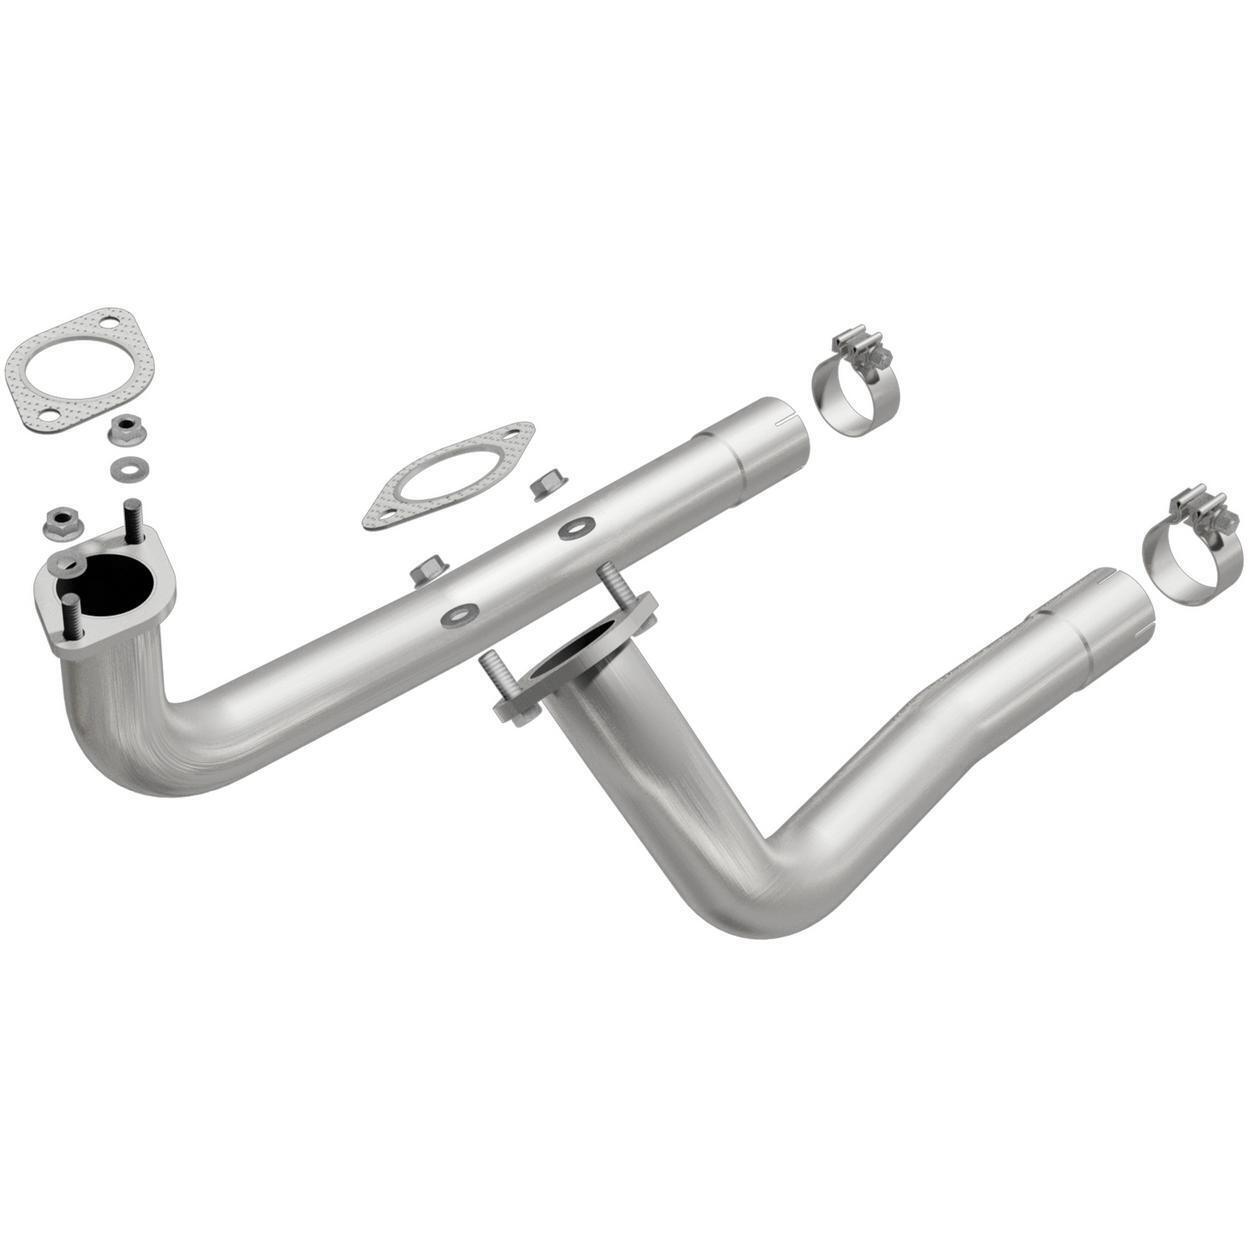 Exhaust and Tail Pipes for 1971-1974 Dodge Coronet 7.2L V8 GAS OHV